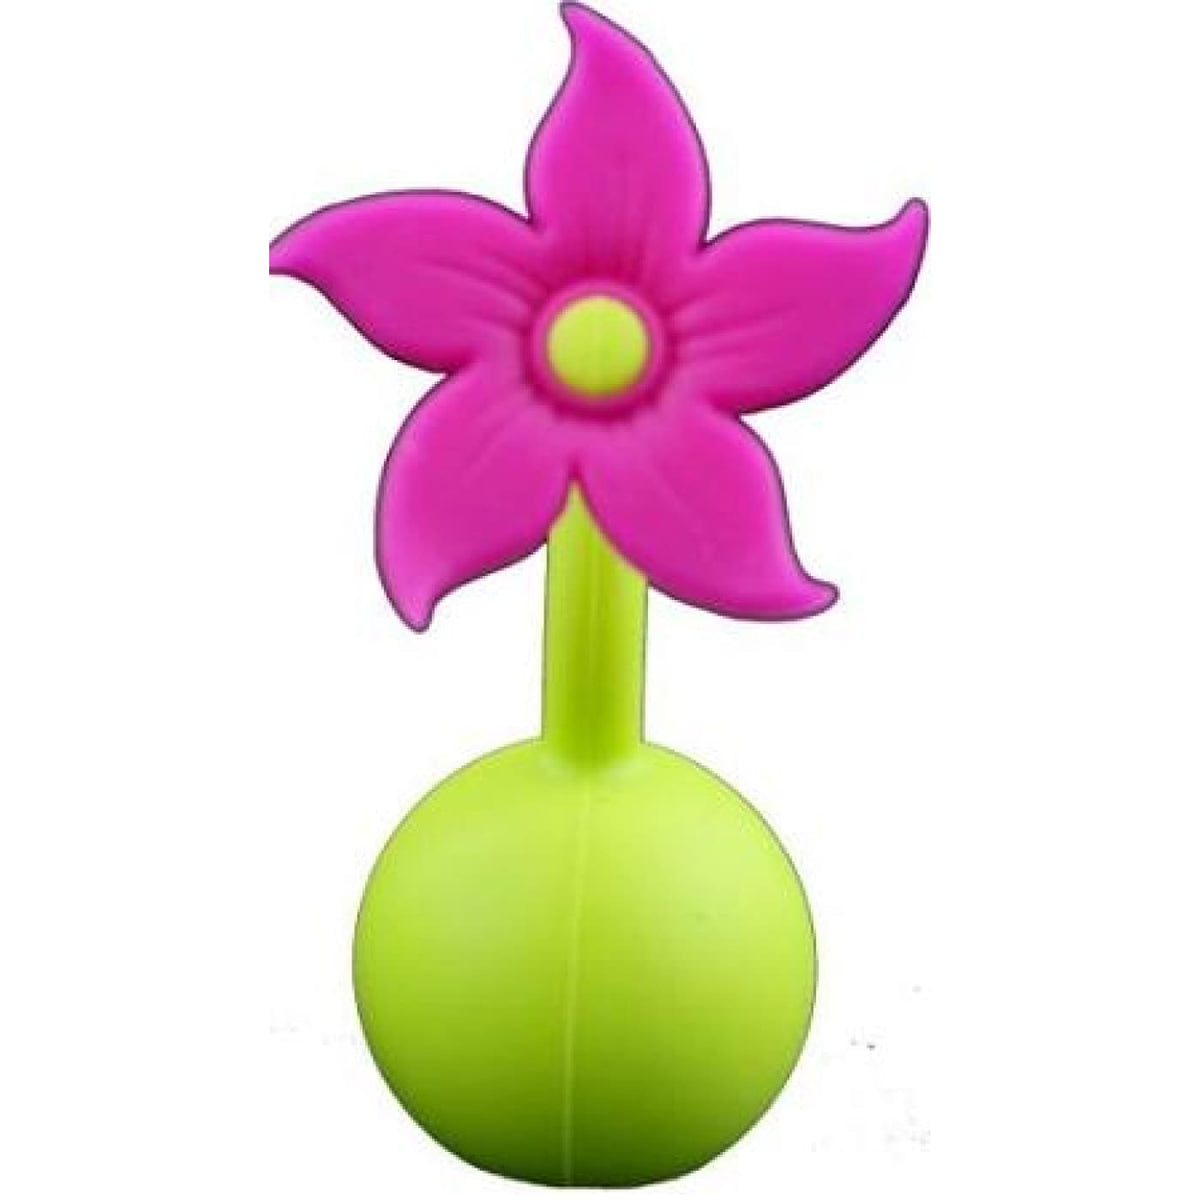 Haakaa Silicone Breast Pump Flower Stopper - Limited Edition Pink - NURSING &amp; FEEDING - BREAST PUMPS/ACCESSORIES